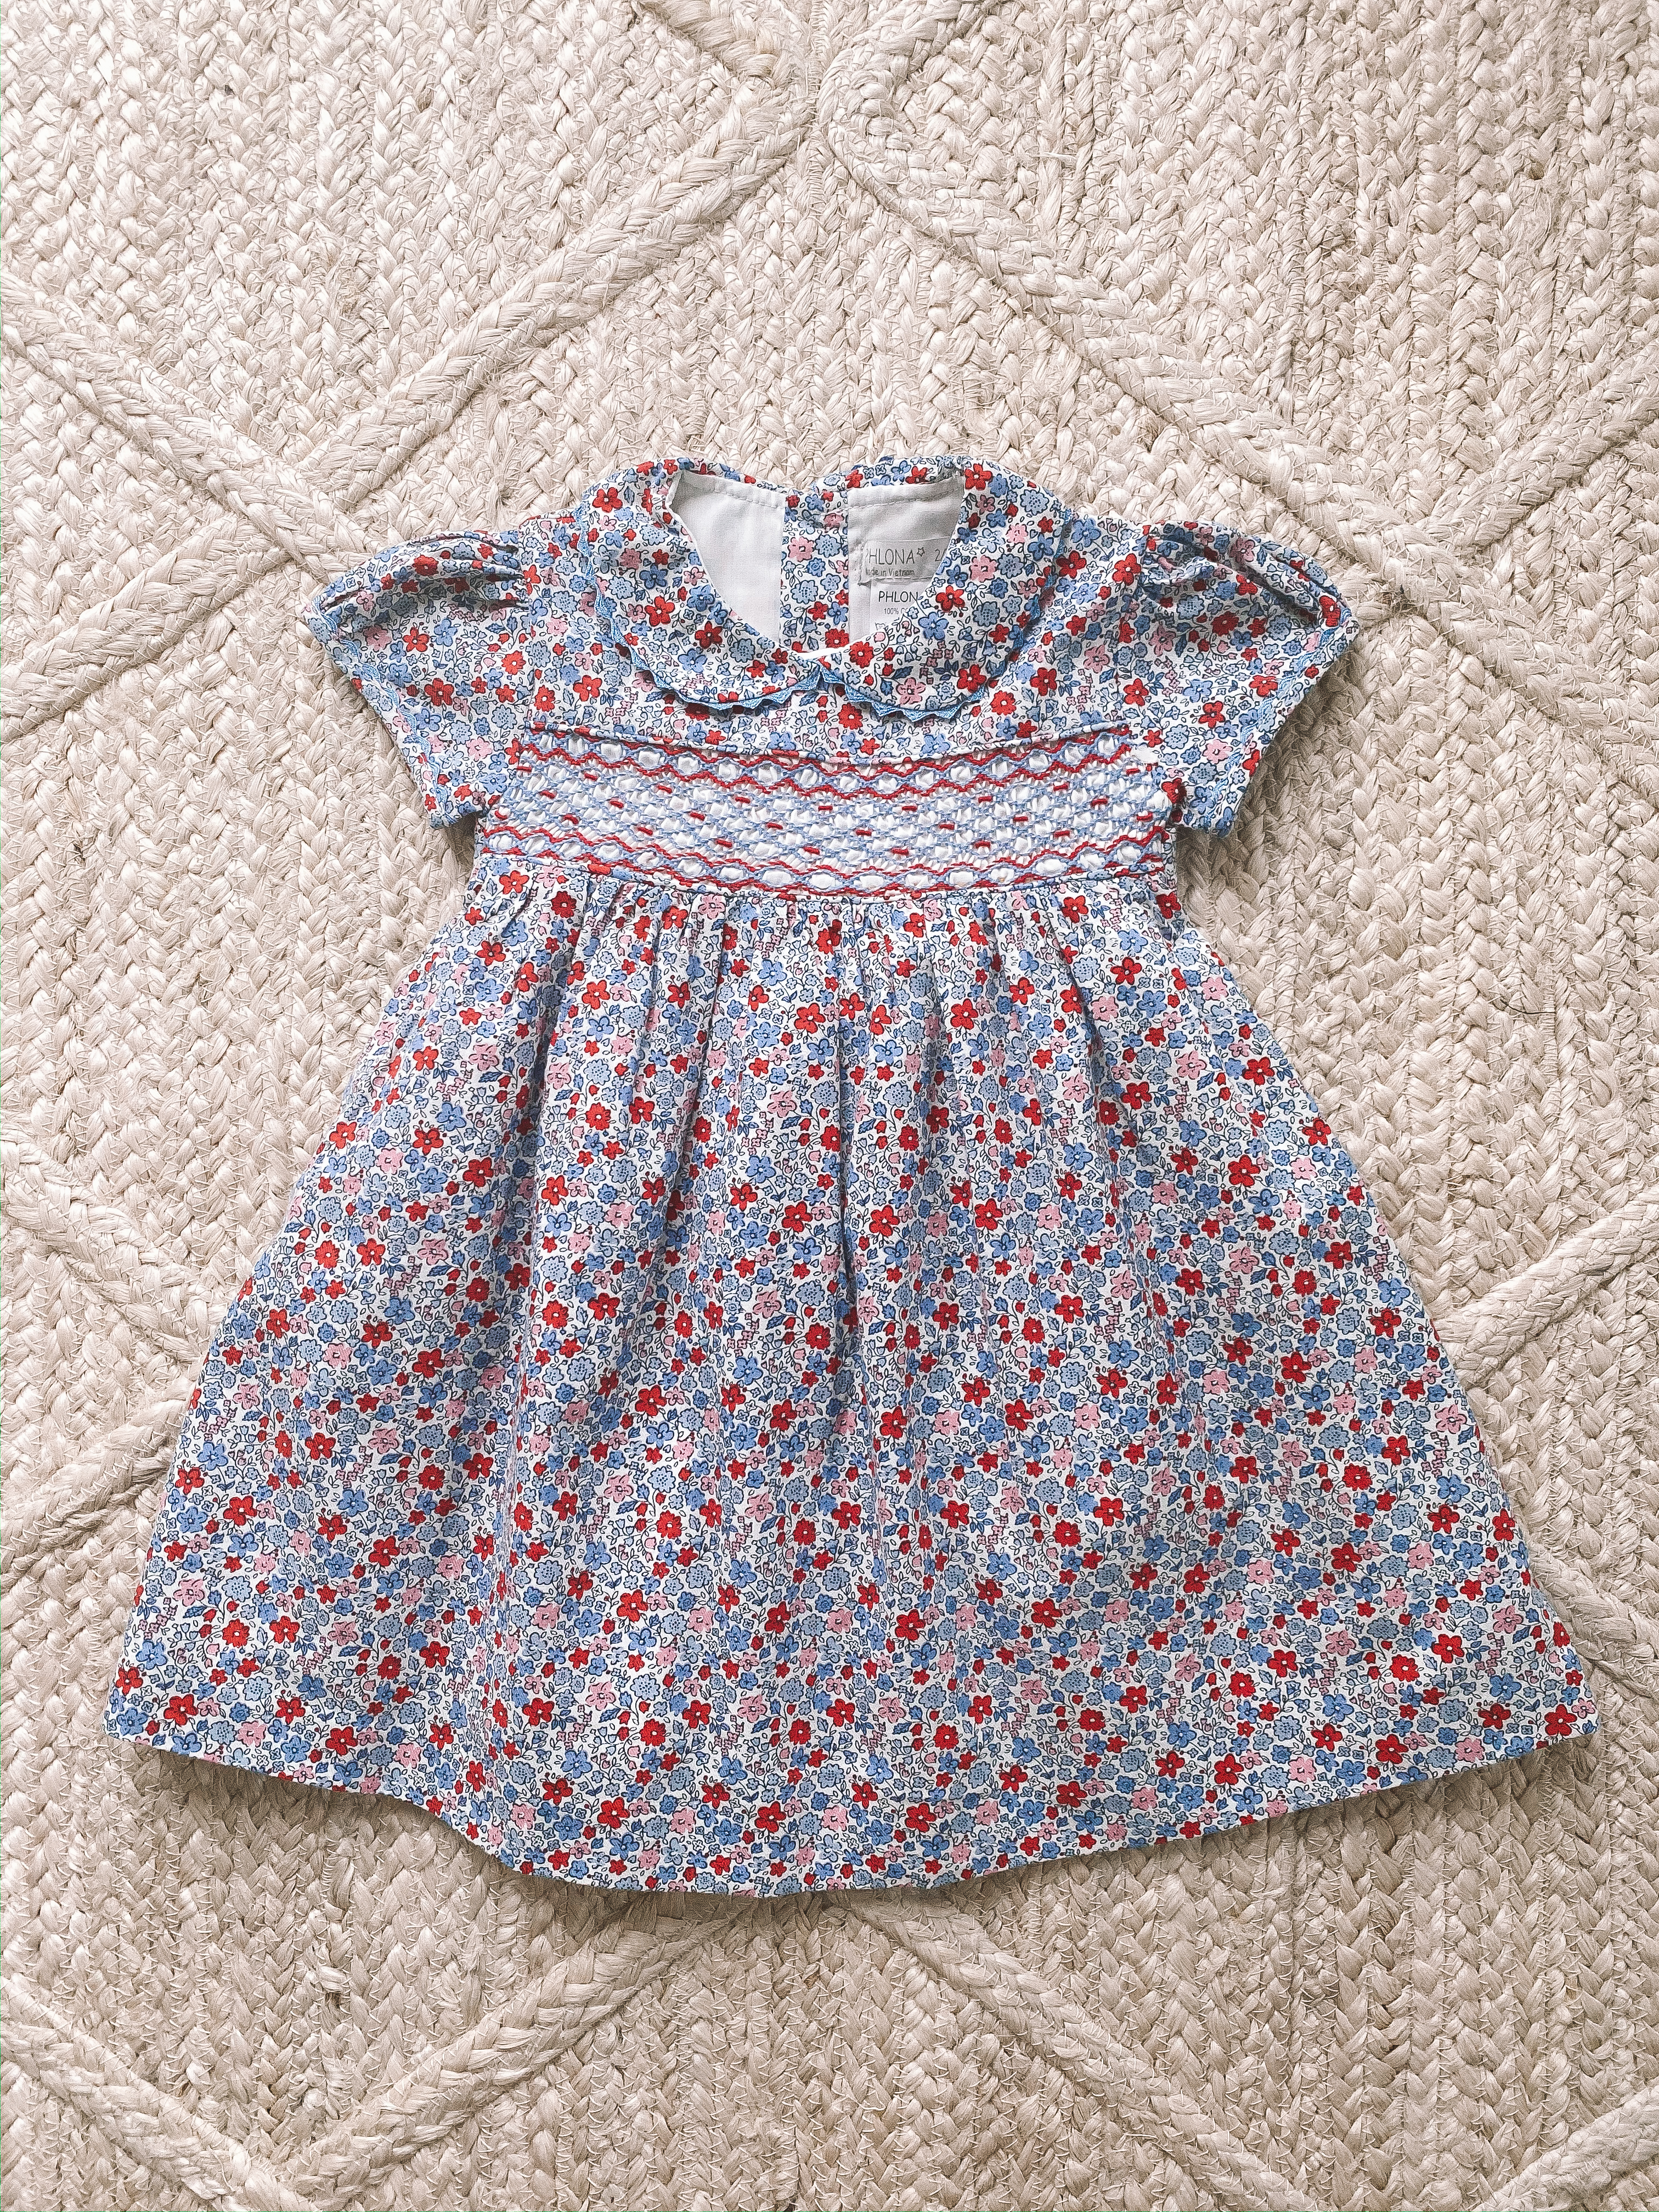 Affordable Smocked Baby + Girls' Dresses from Amazon